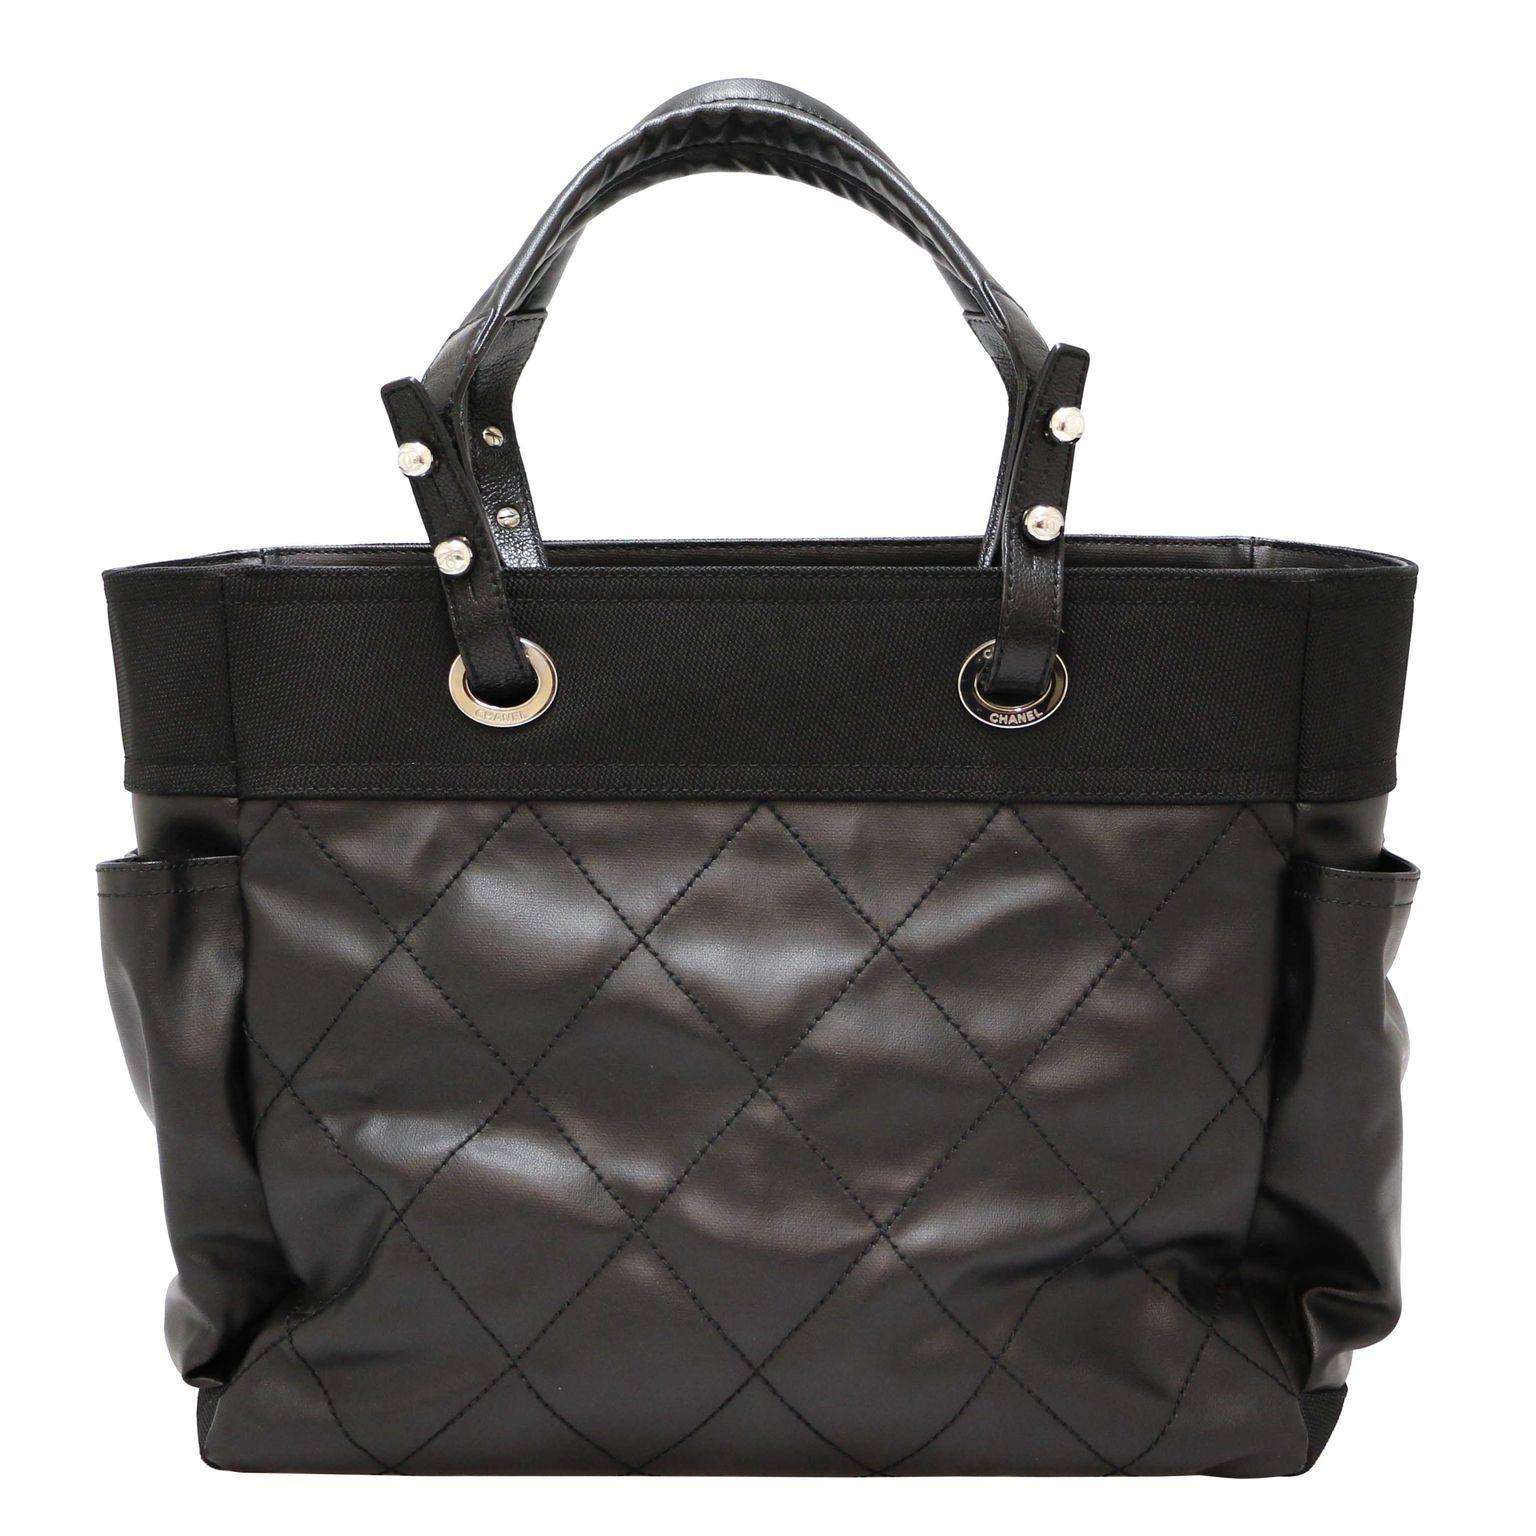 Beautiful Tote bag from Chanel in black coated fabric. The jewels are in silver metal. Made in Italie in 2010-2011
Genre : women
Interior : textile
Dimensions : 37 x 30 x 15 cm
straps : 50 cm
Hologram : 1407...
Details : zipper, zip pocket on the